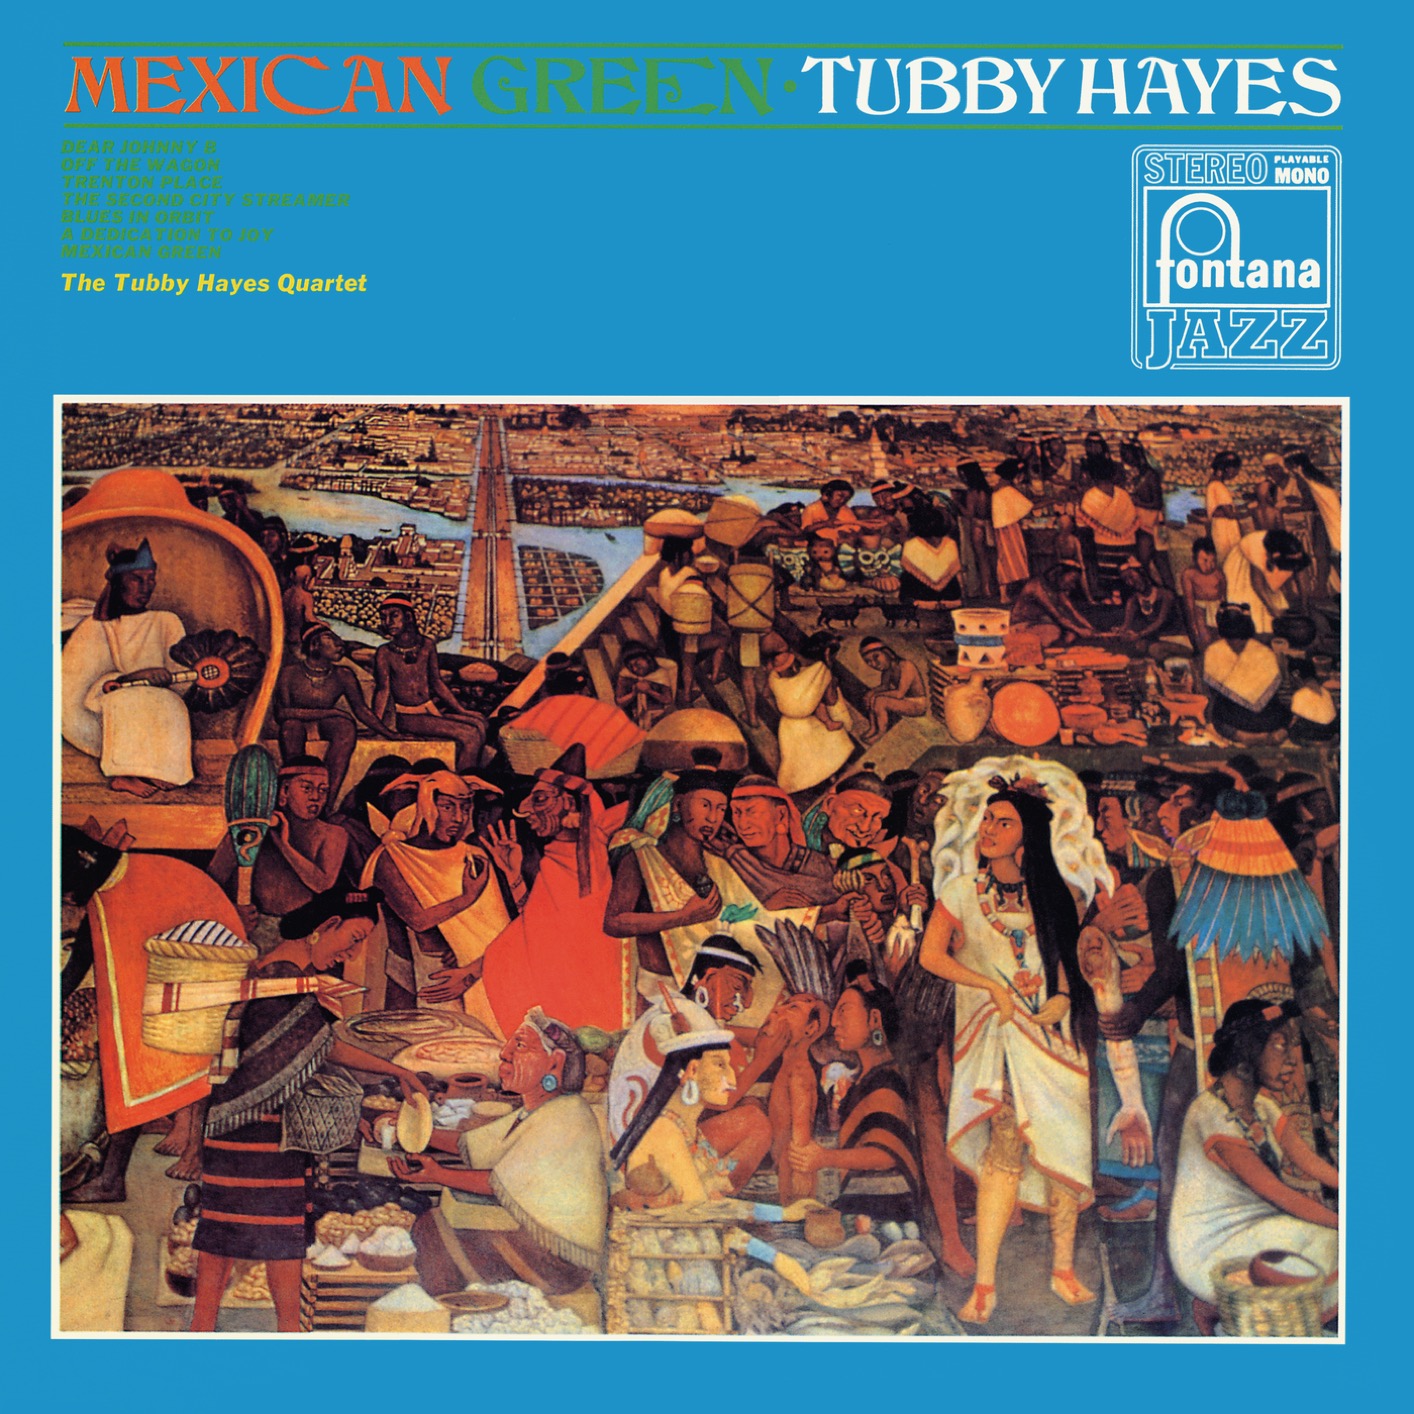 The Tubby Hayes Quartet – Mexican Green (Remastered) (1968/2019) [FLAC 24bit/88,2kHz]